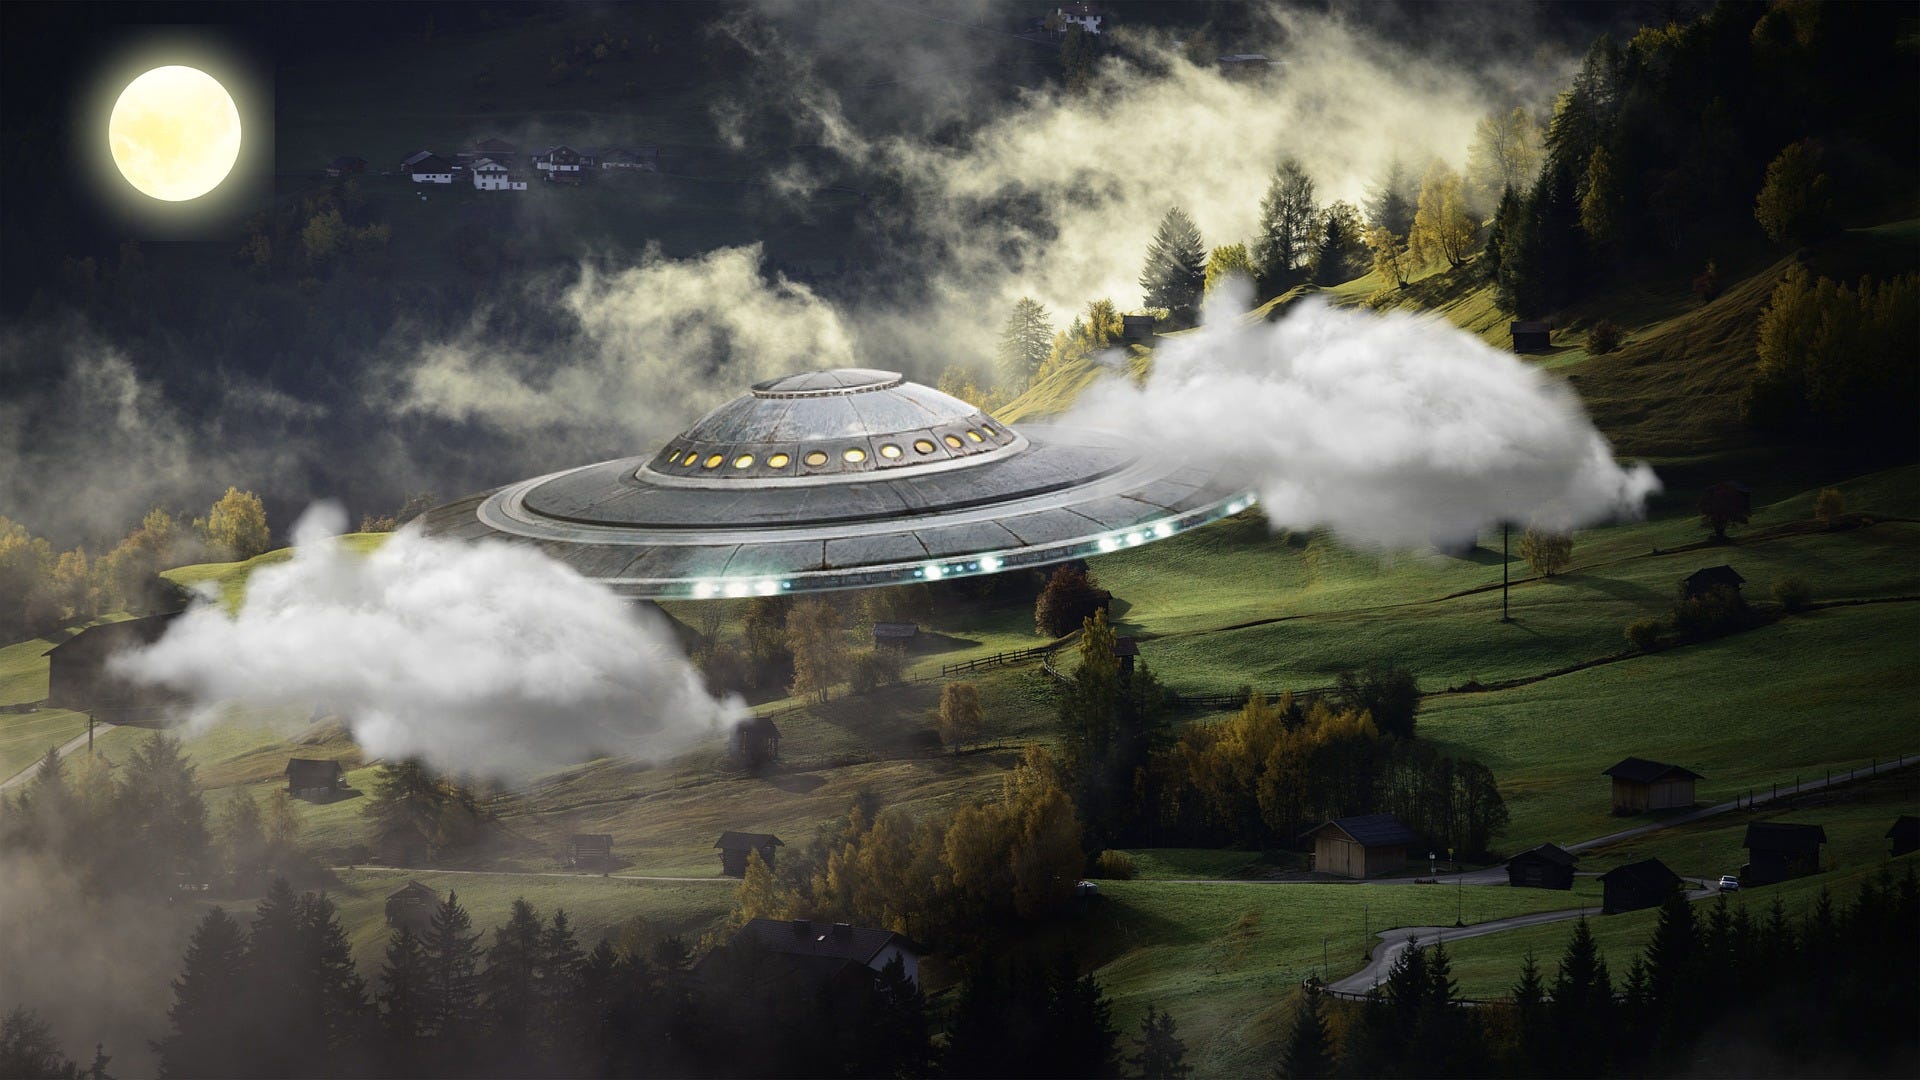 UFO: The most famous sightings